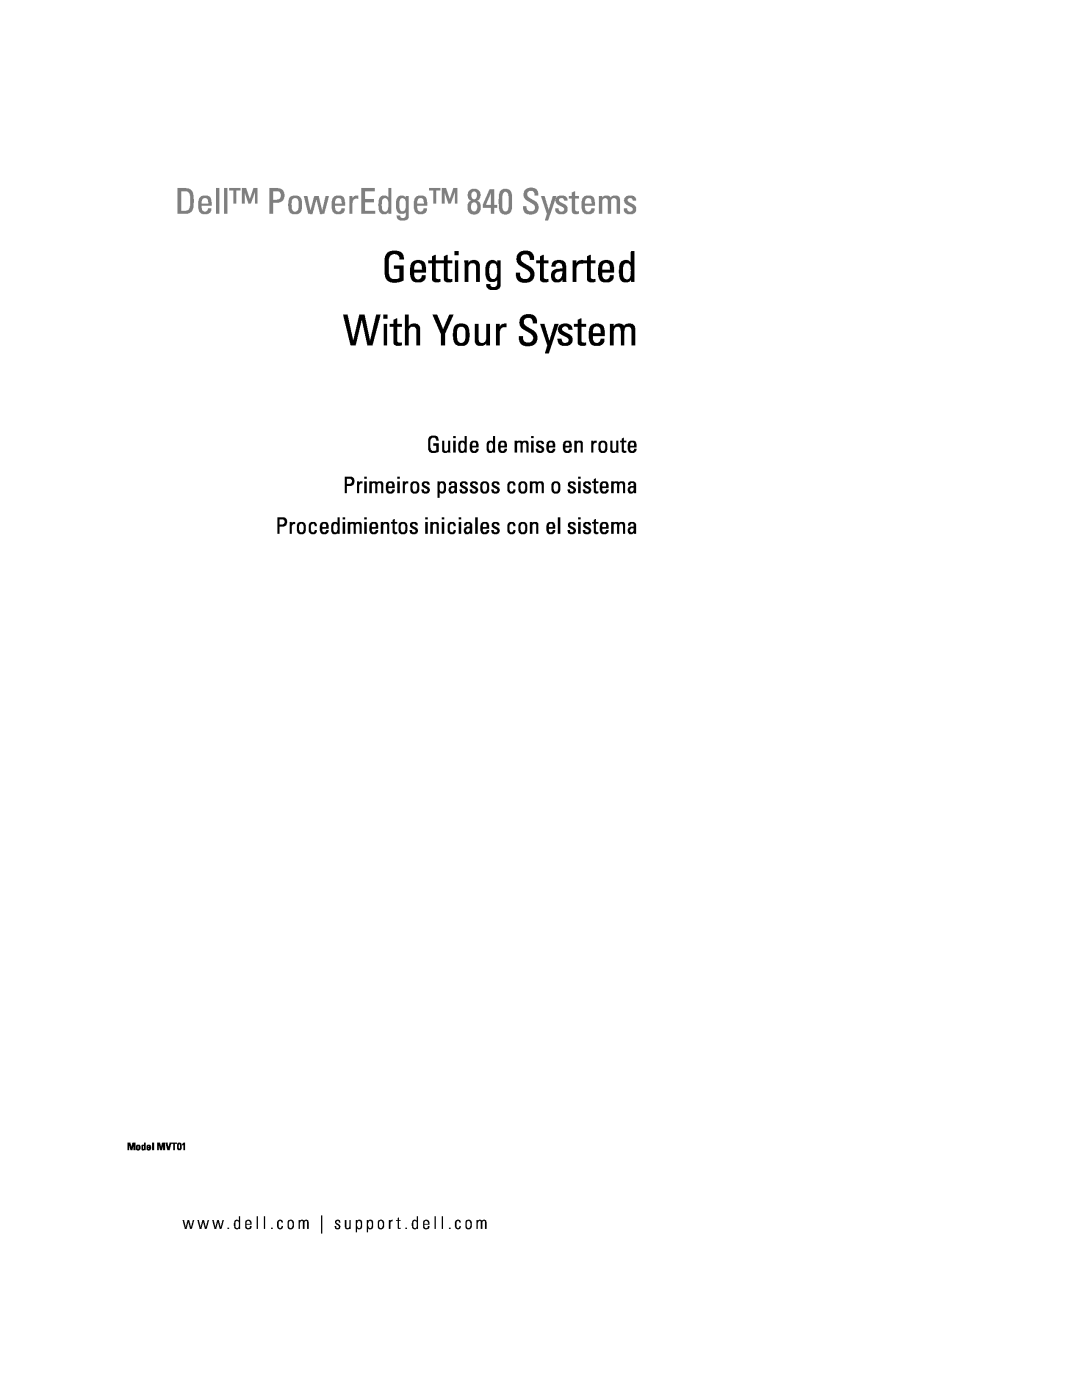 Dell JU892, MVT01 manual Getting Started Guide With Your System, Dell PowerVault, Guide de mise en route 